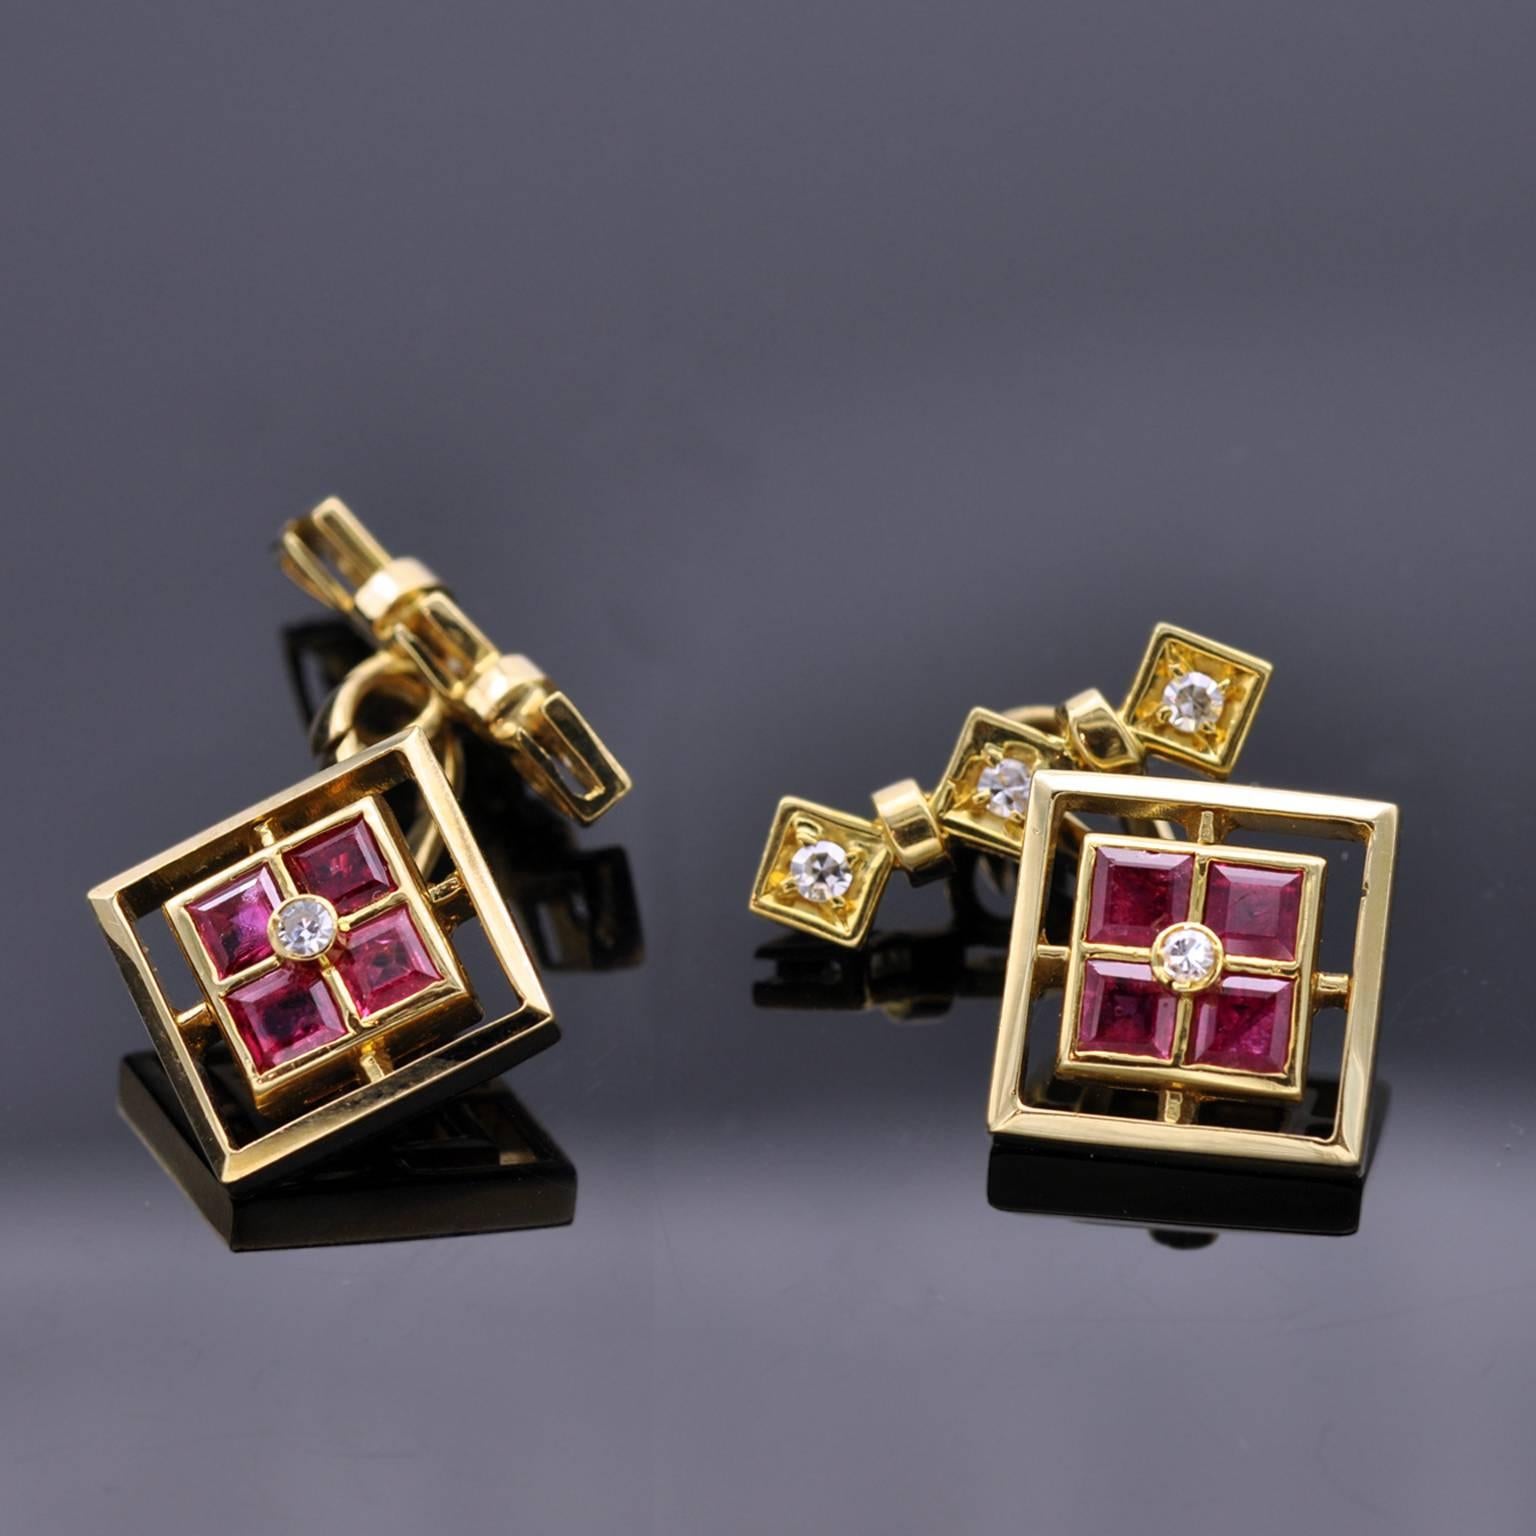 These refined 18 Karat yellow gold cufflinks are composed of four square rubies with a diamond nested in their midst in a stylish square design. On the back end, to hold the cufflink in place, three diamonds are set in three squares. These very